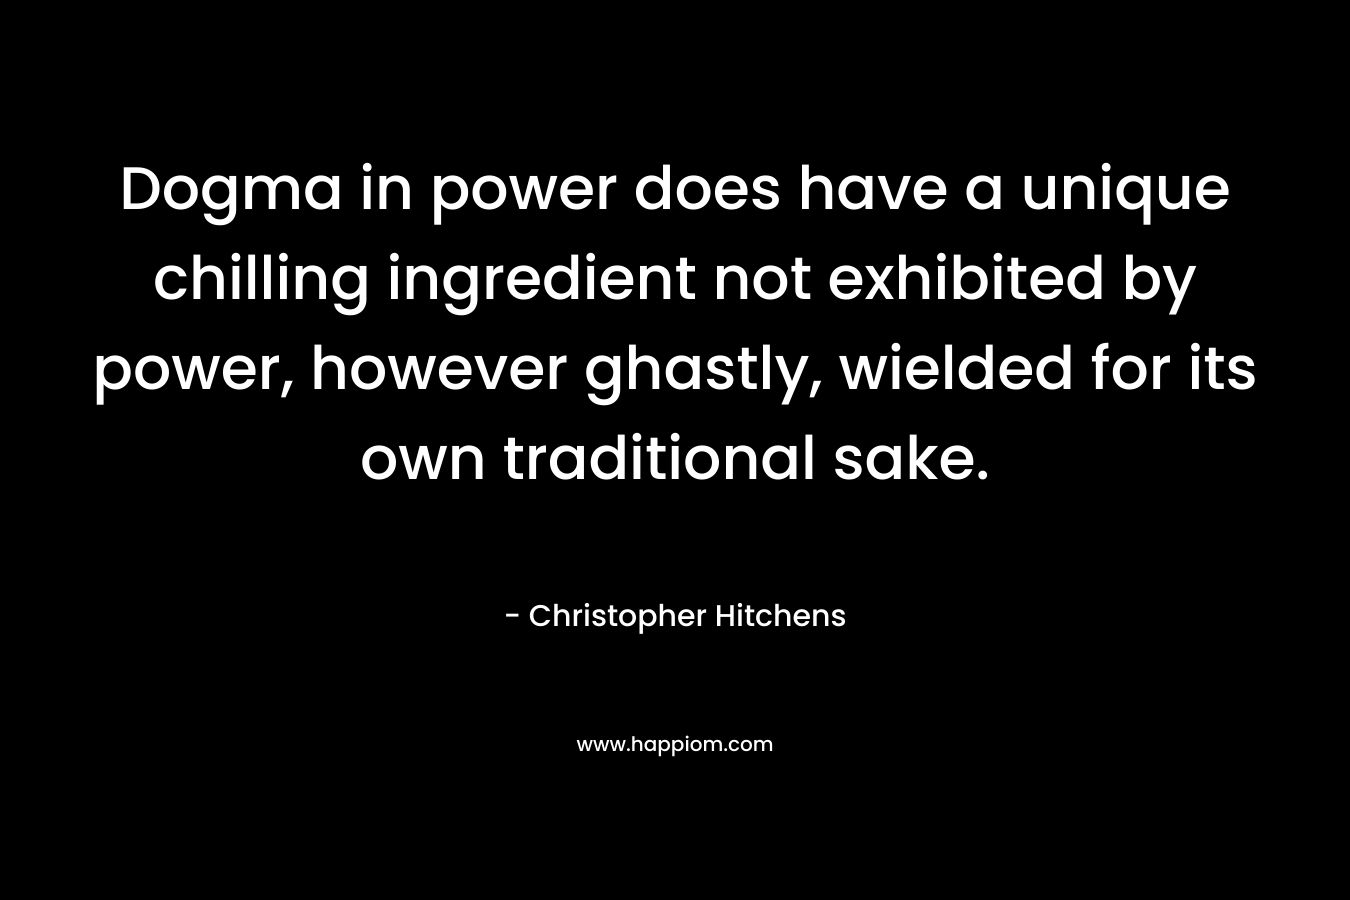 Dogma in power does have a unique chilling ingredient not exhibited by power, however ghastly, wielded for its own traditional sake.